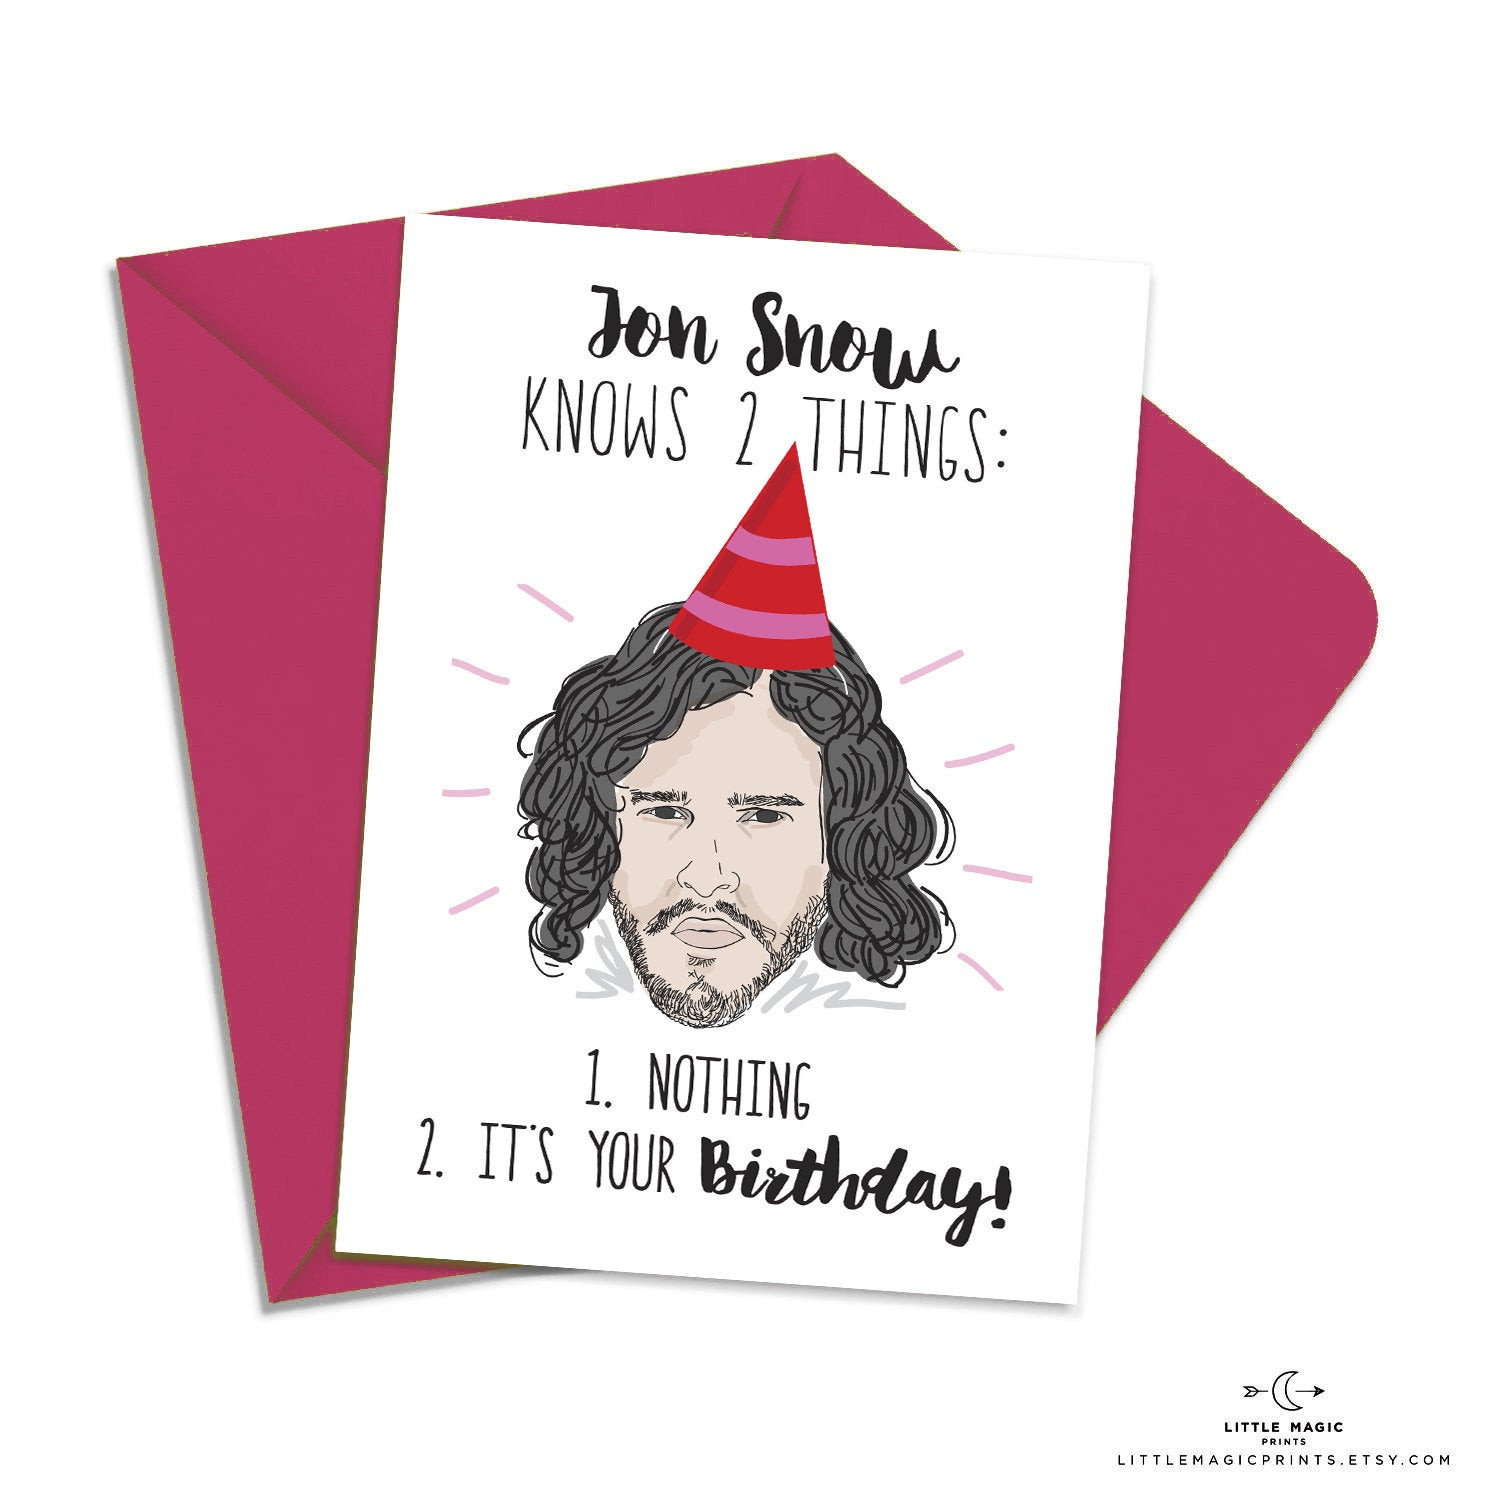 Game Of Thrones Birthday Card
 Printable Game of Thrones Card Printable Jon Snow Birthday